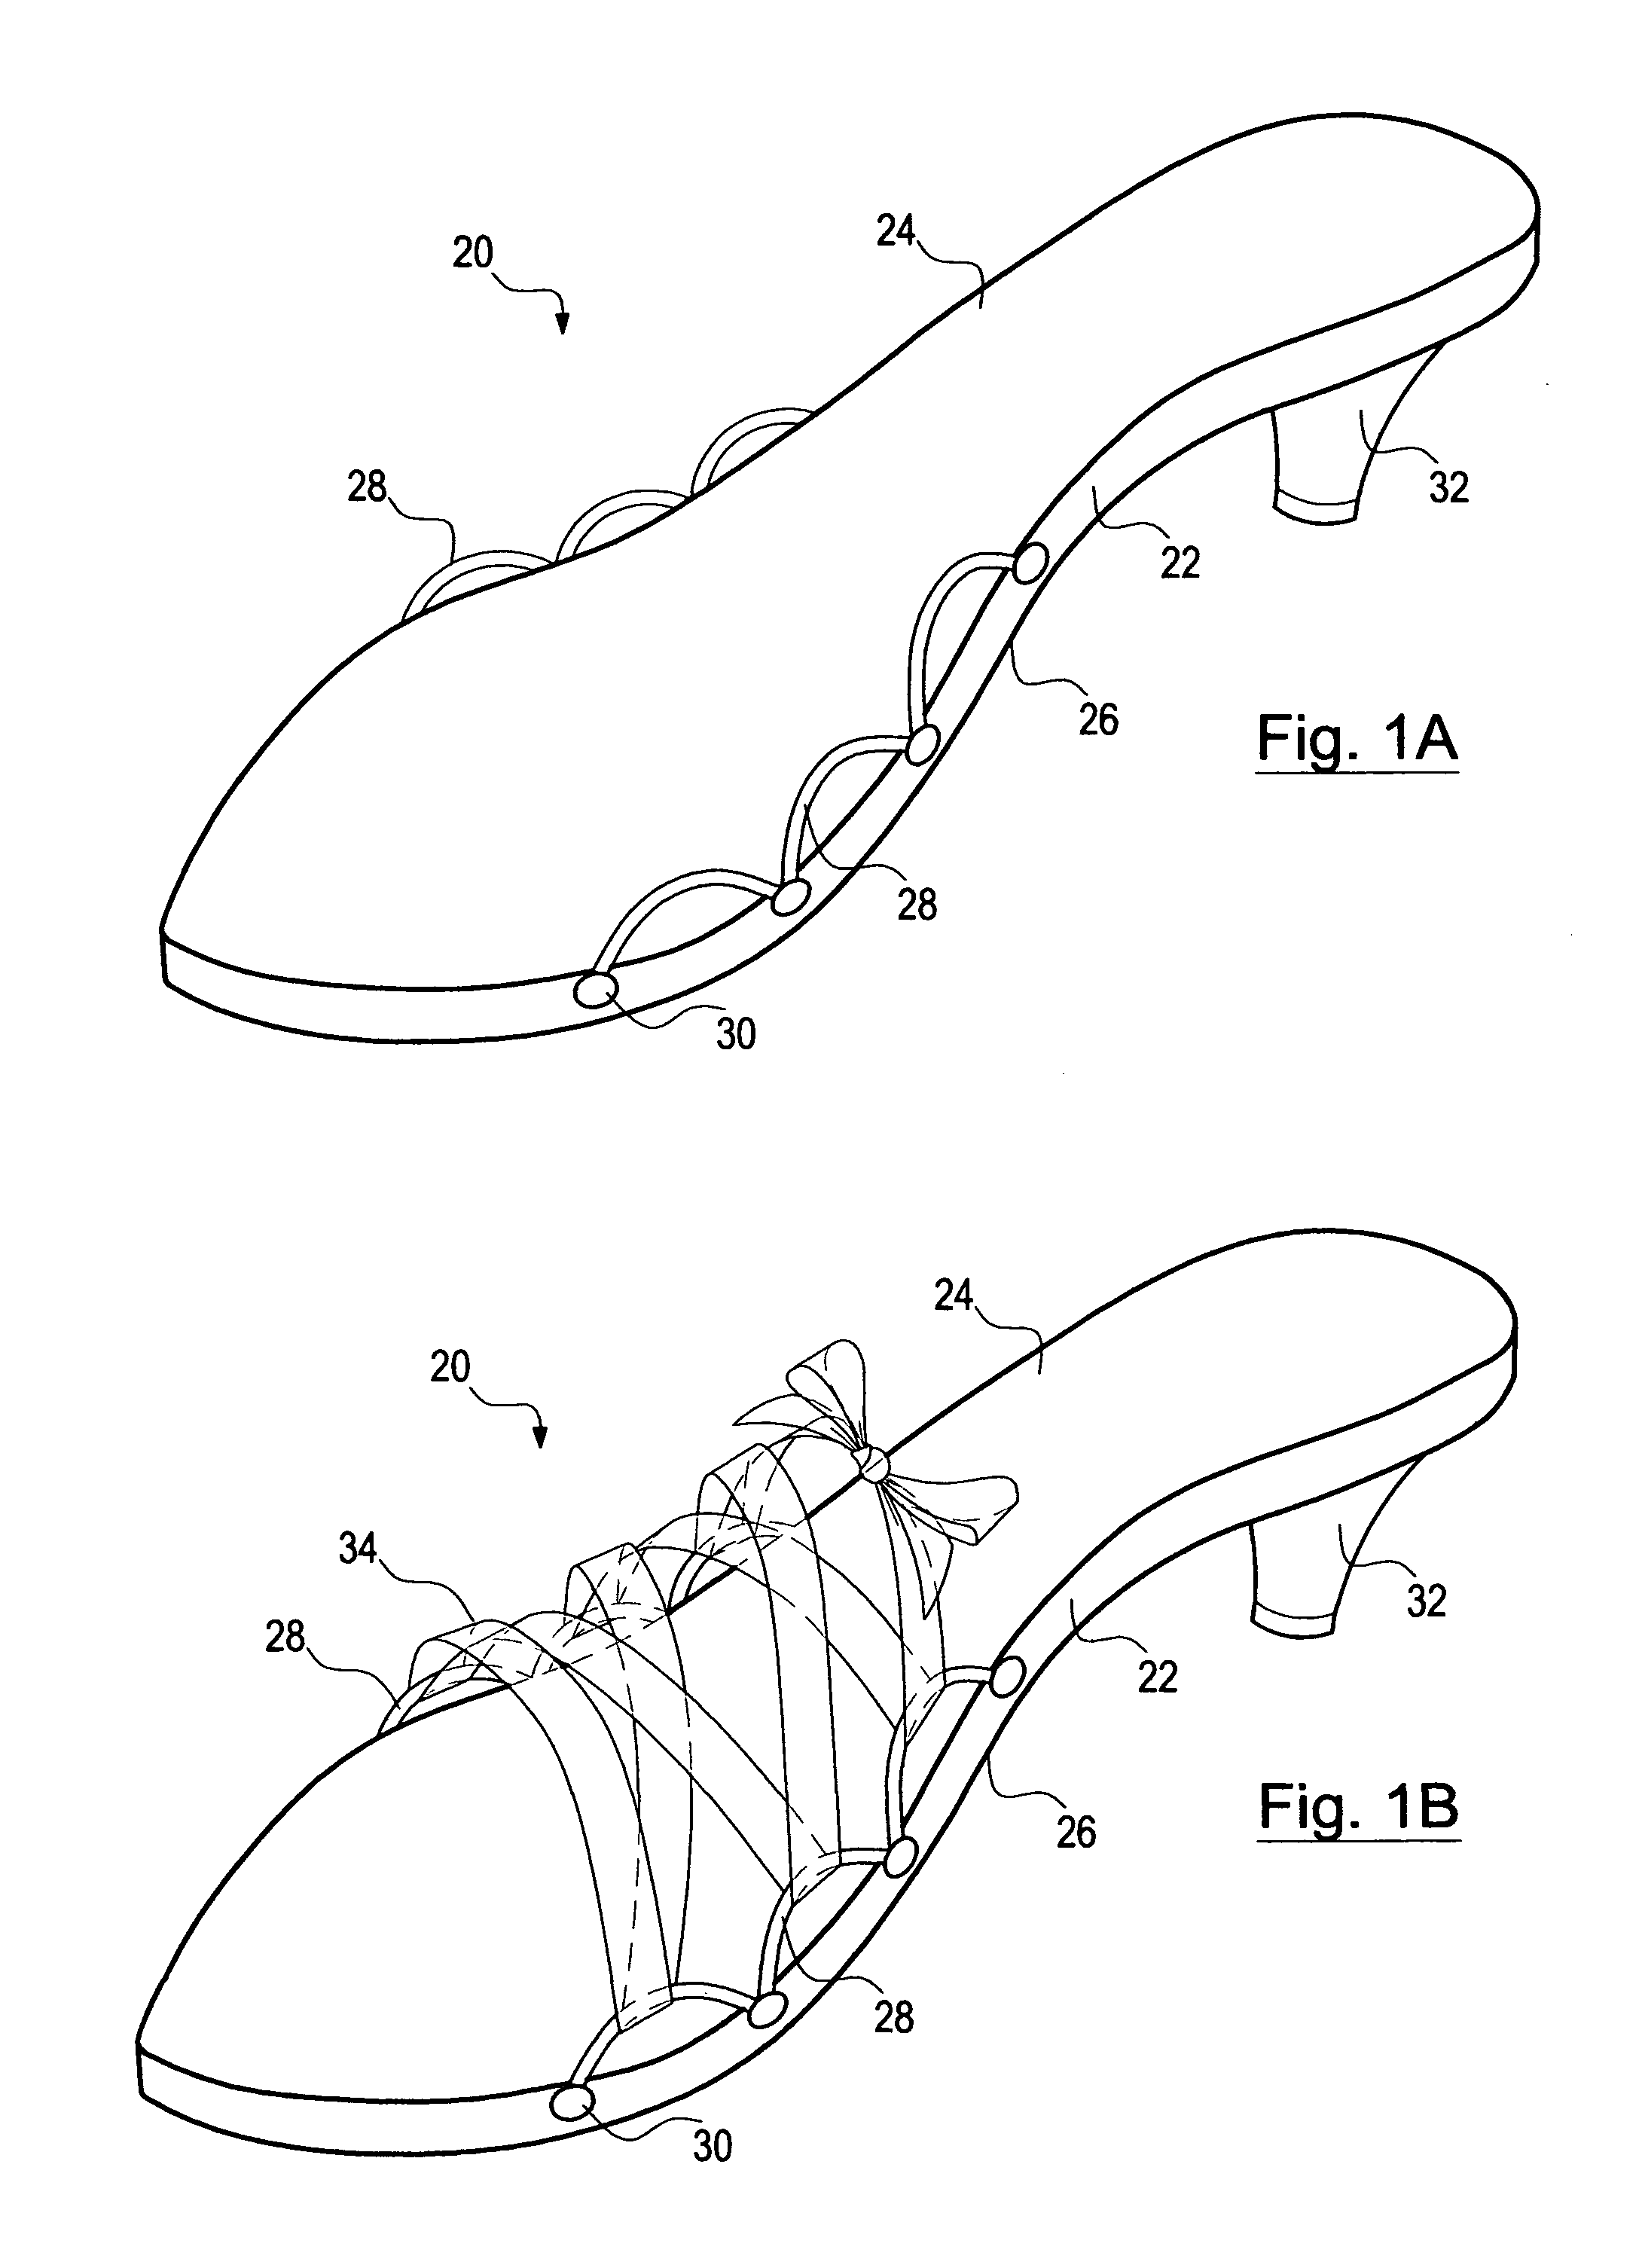 Shoe with elastic bindings to receive interchangeable straps